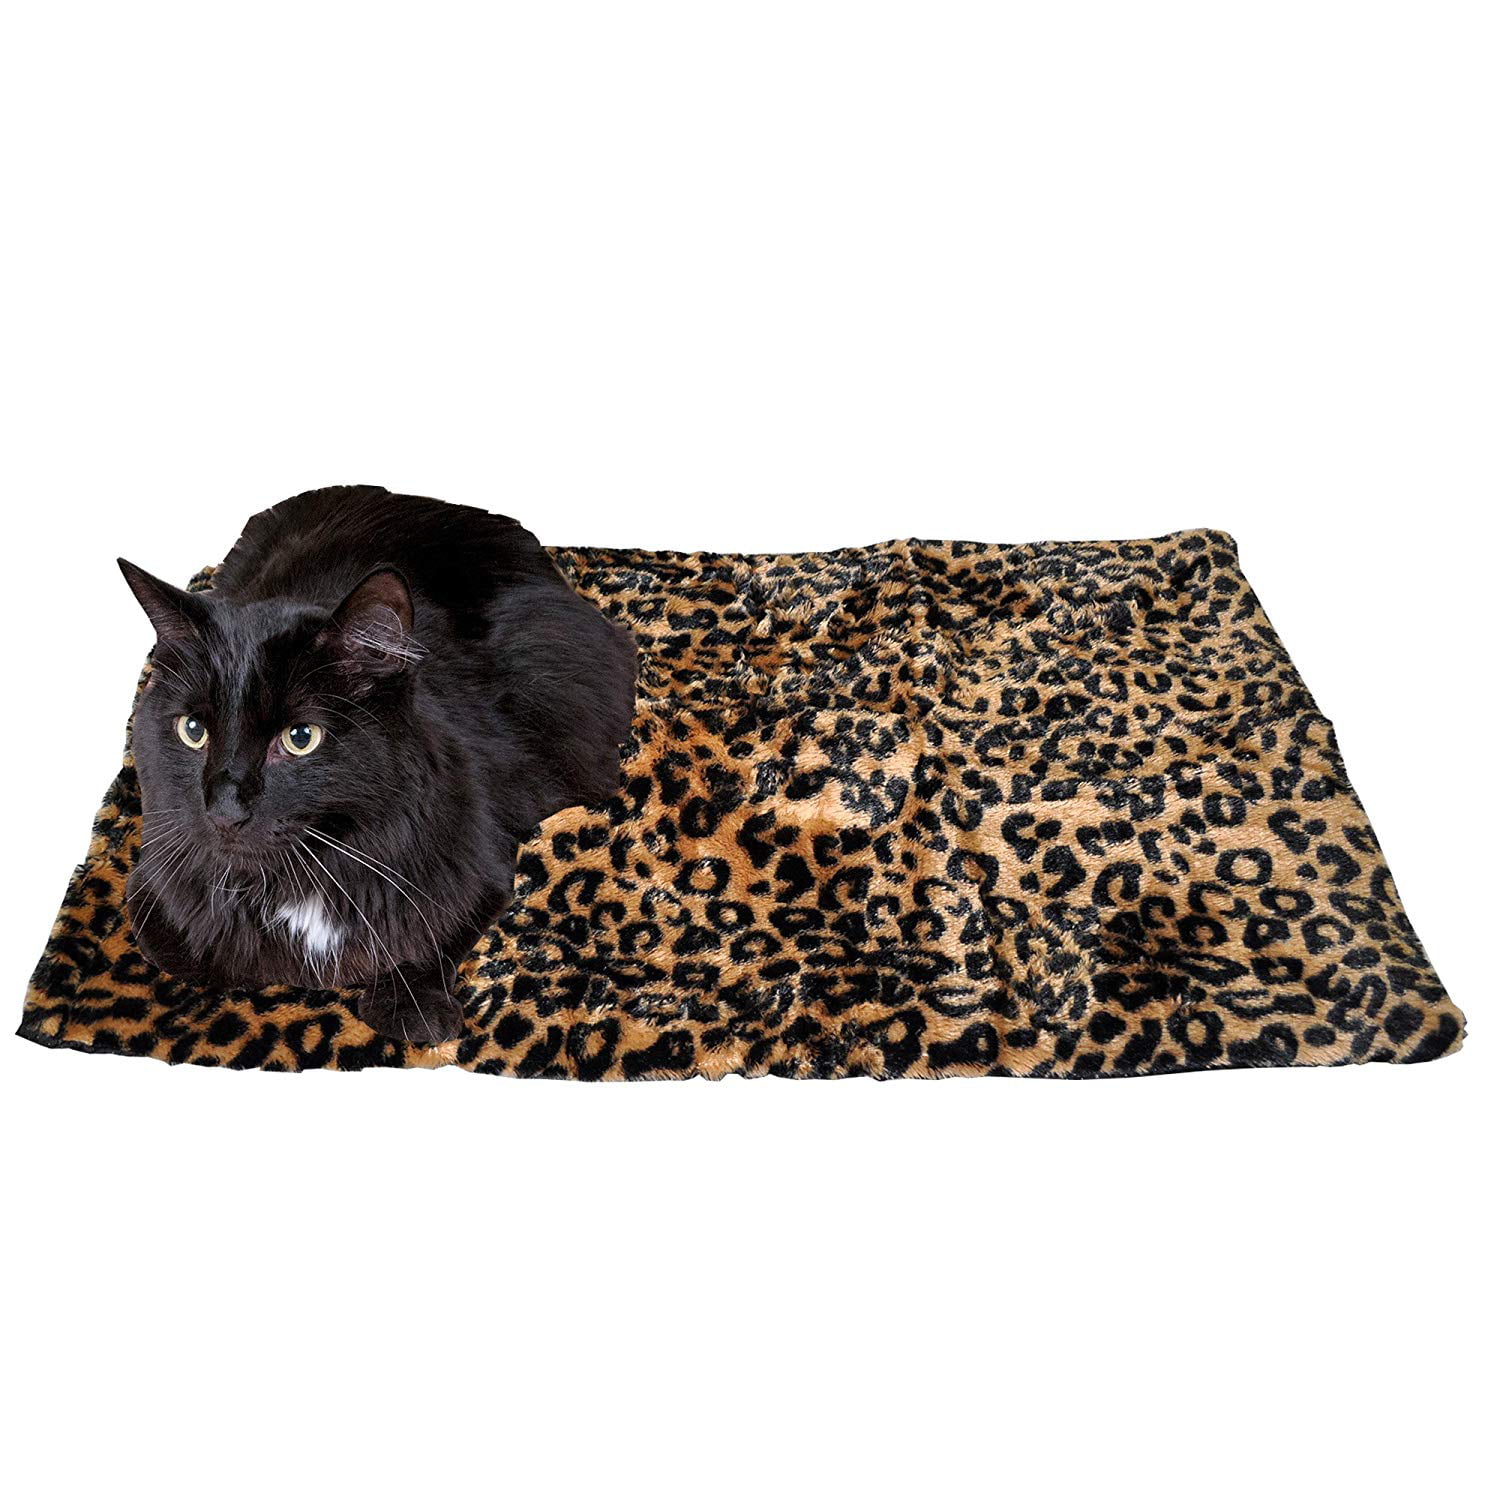 Thermal Cat Pet Dog Connectable Warming Bed Mat, Comfortable Nap, Sleeping and Crate Mat for